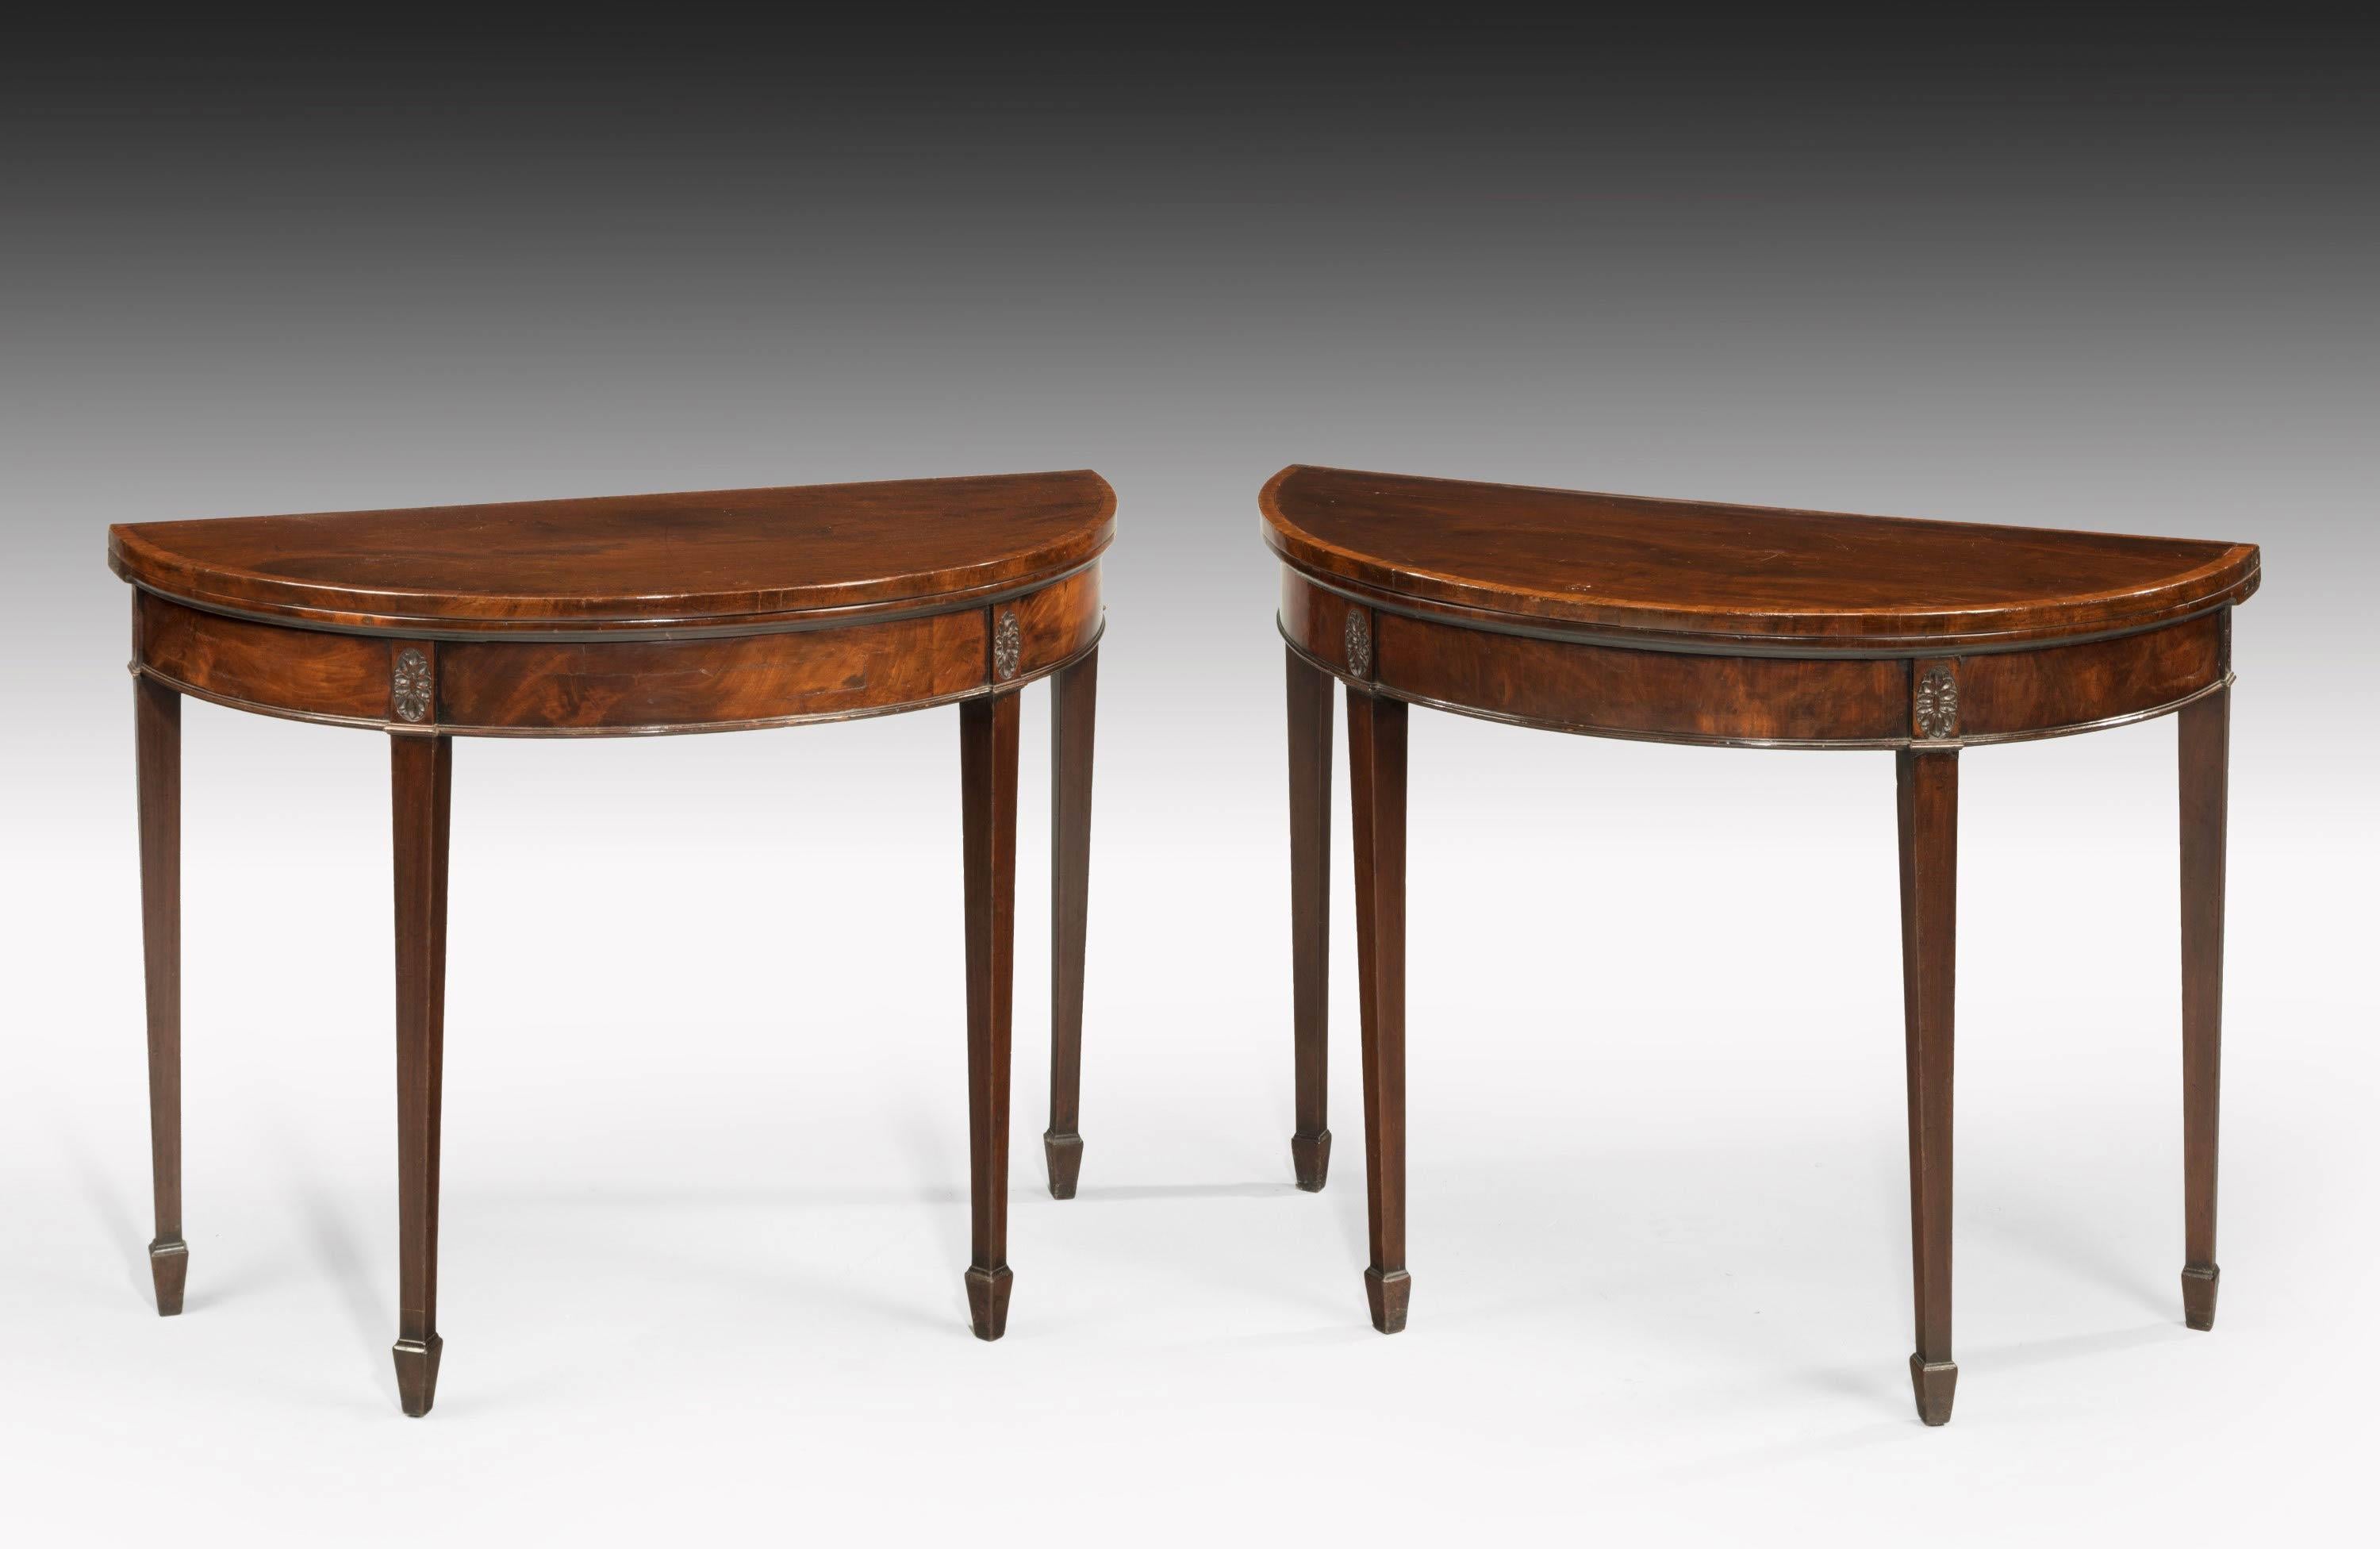 Pair of George III Period Mahogany Card and Tea Tables In Good Condition For Sale In Peterborough, Northamptonshire